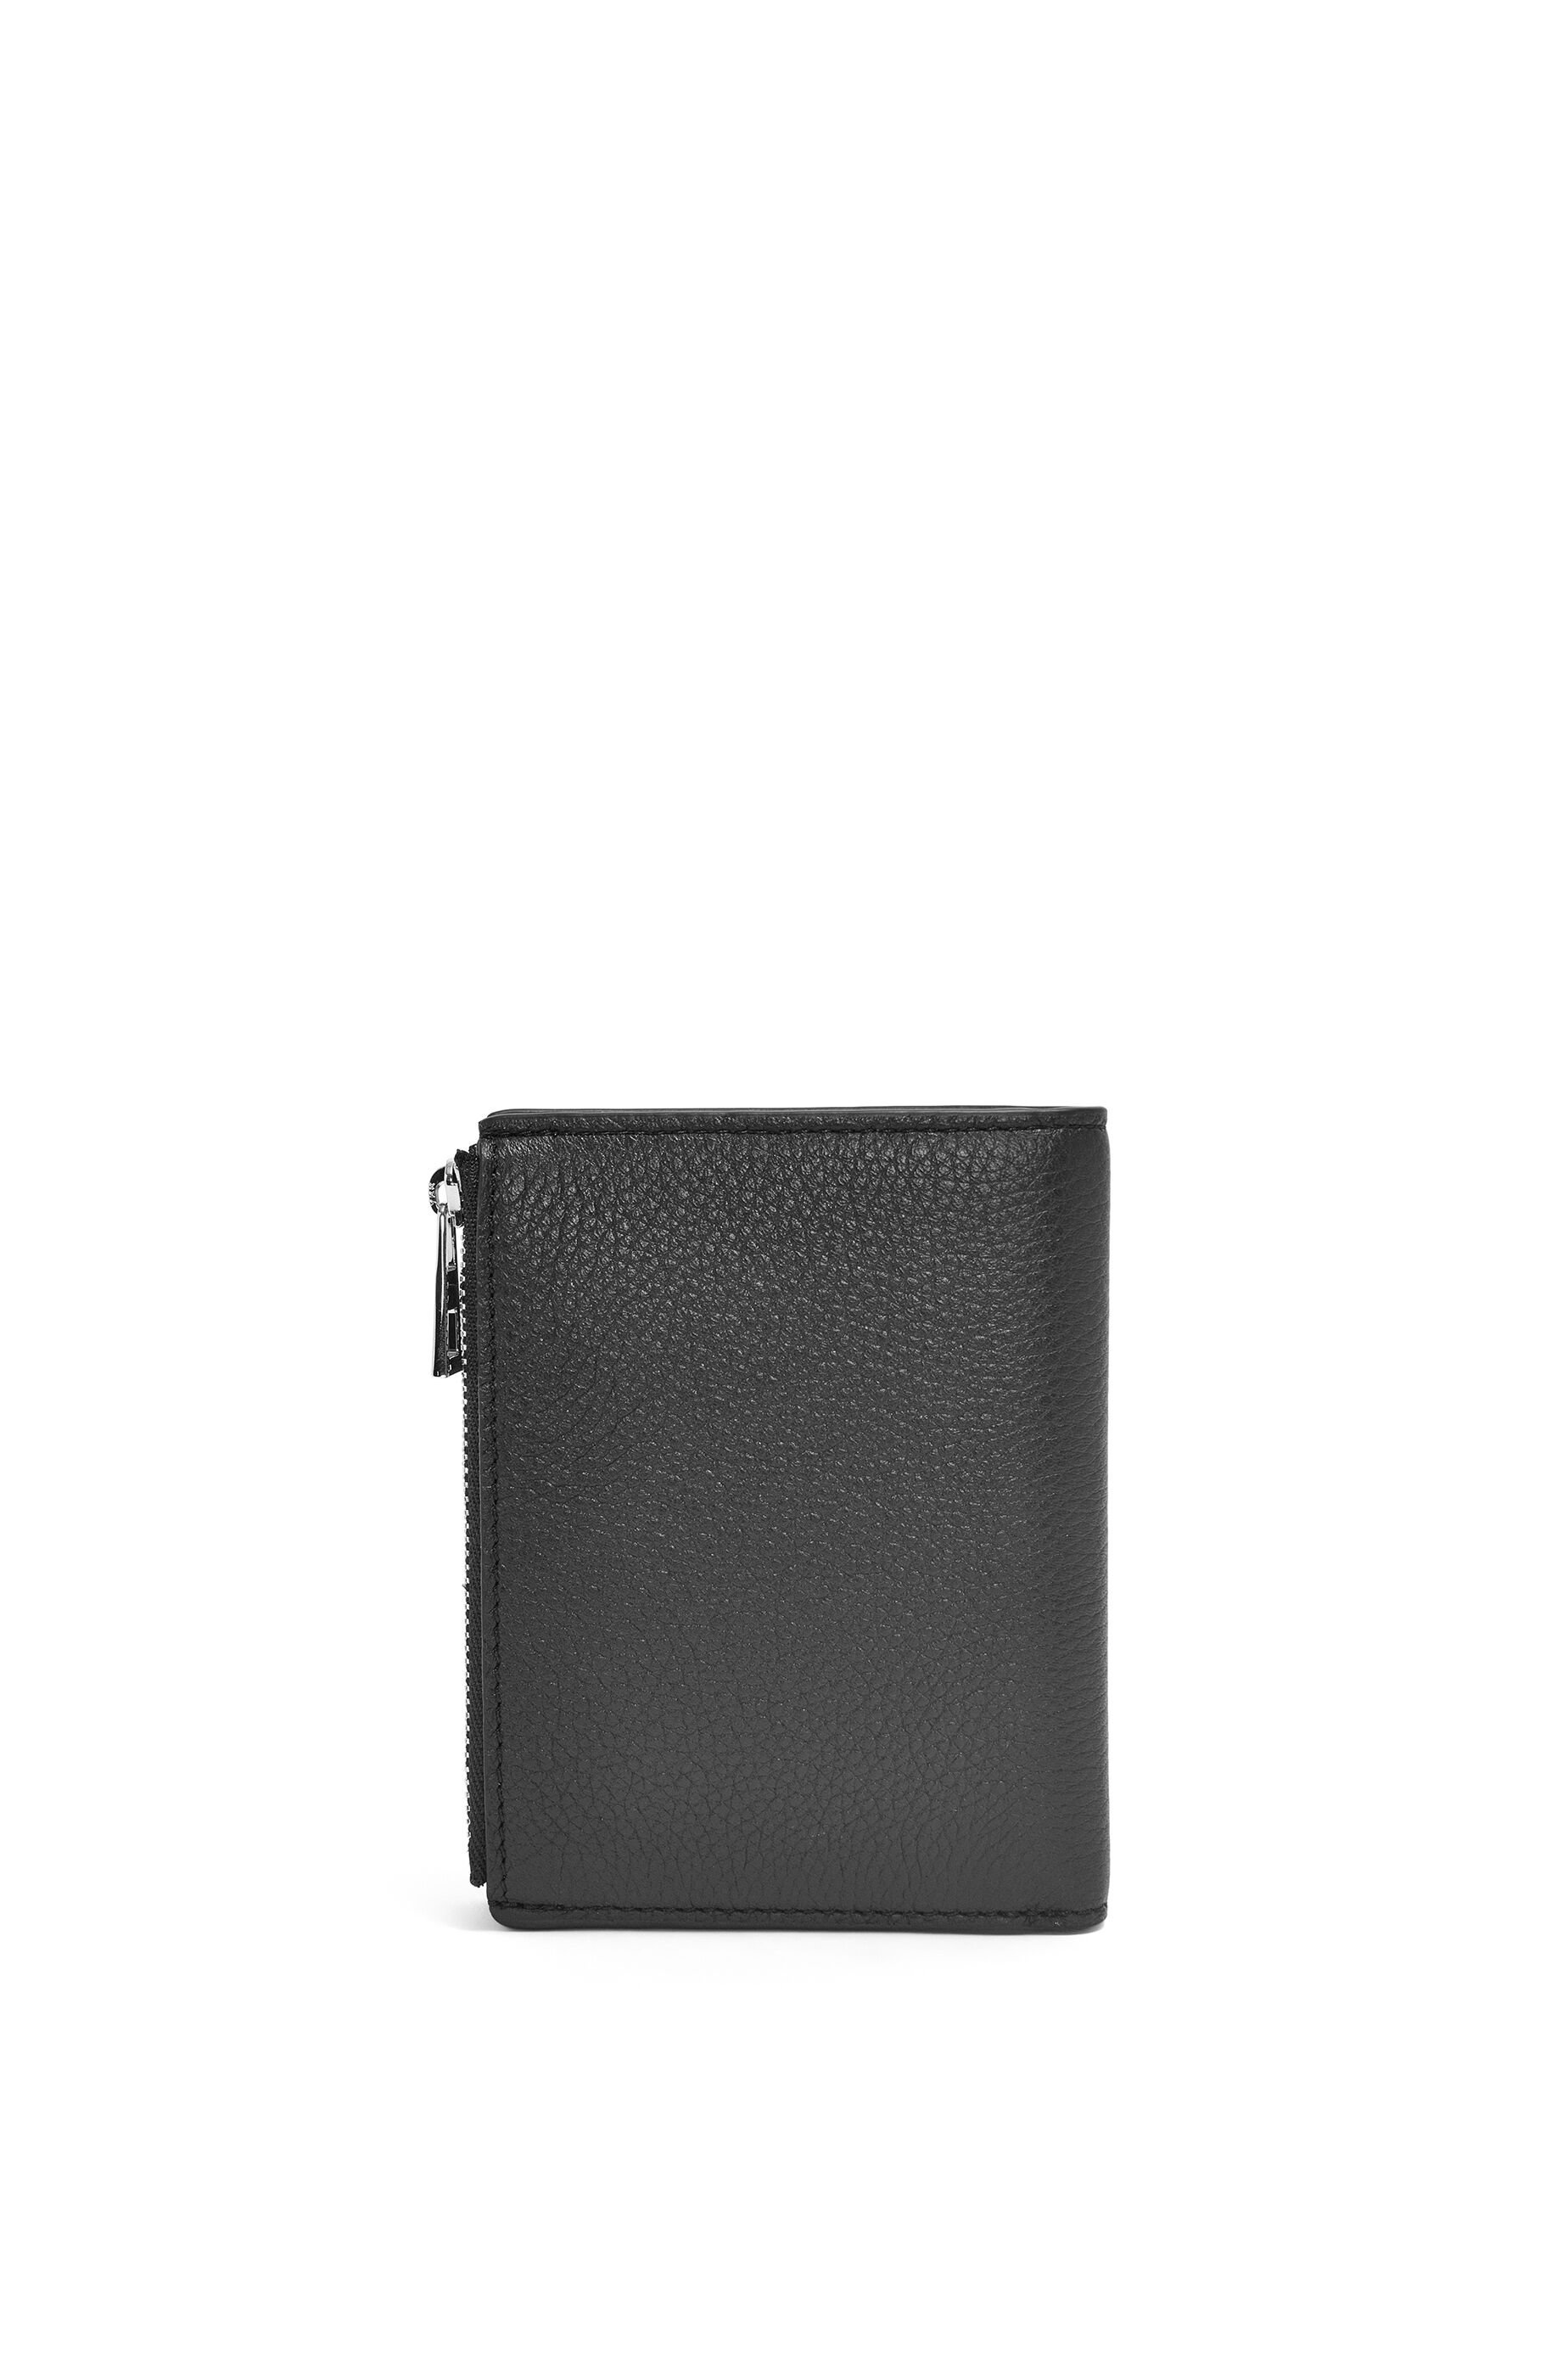 Slim compact wallet in soft grained calfskin - 4